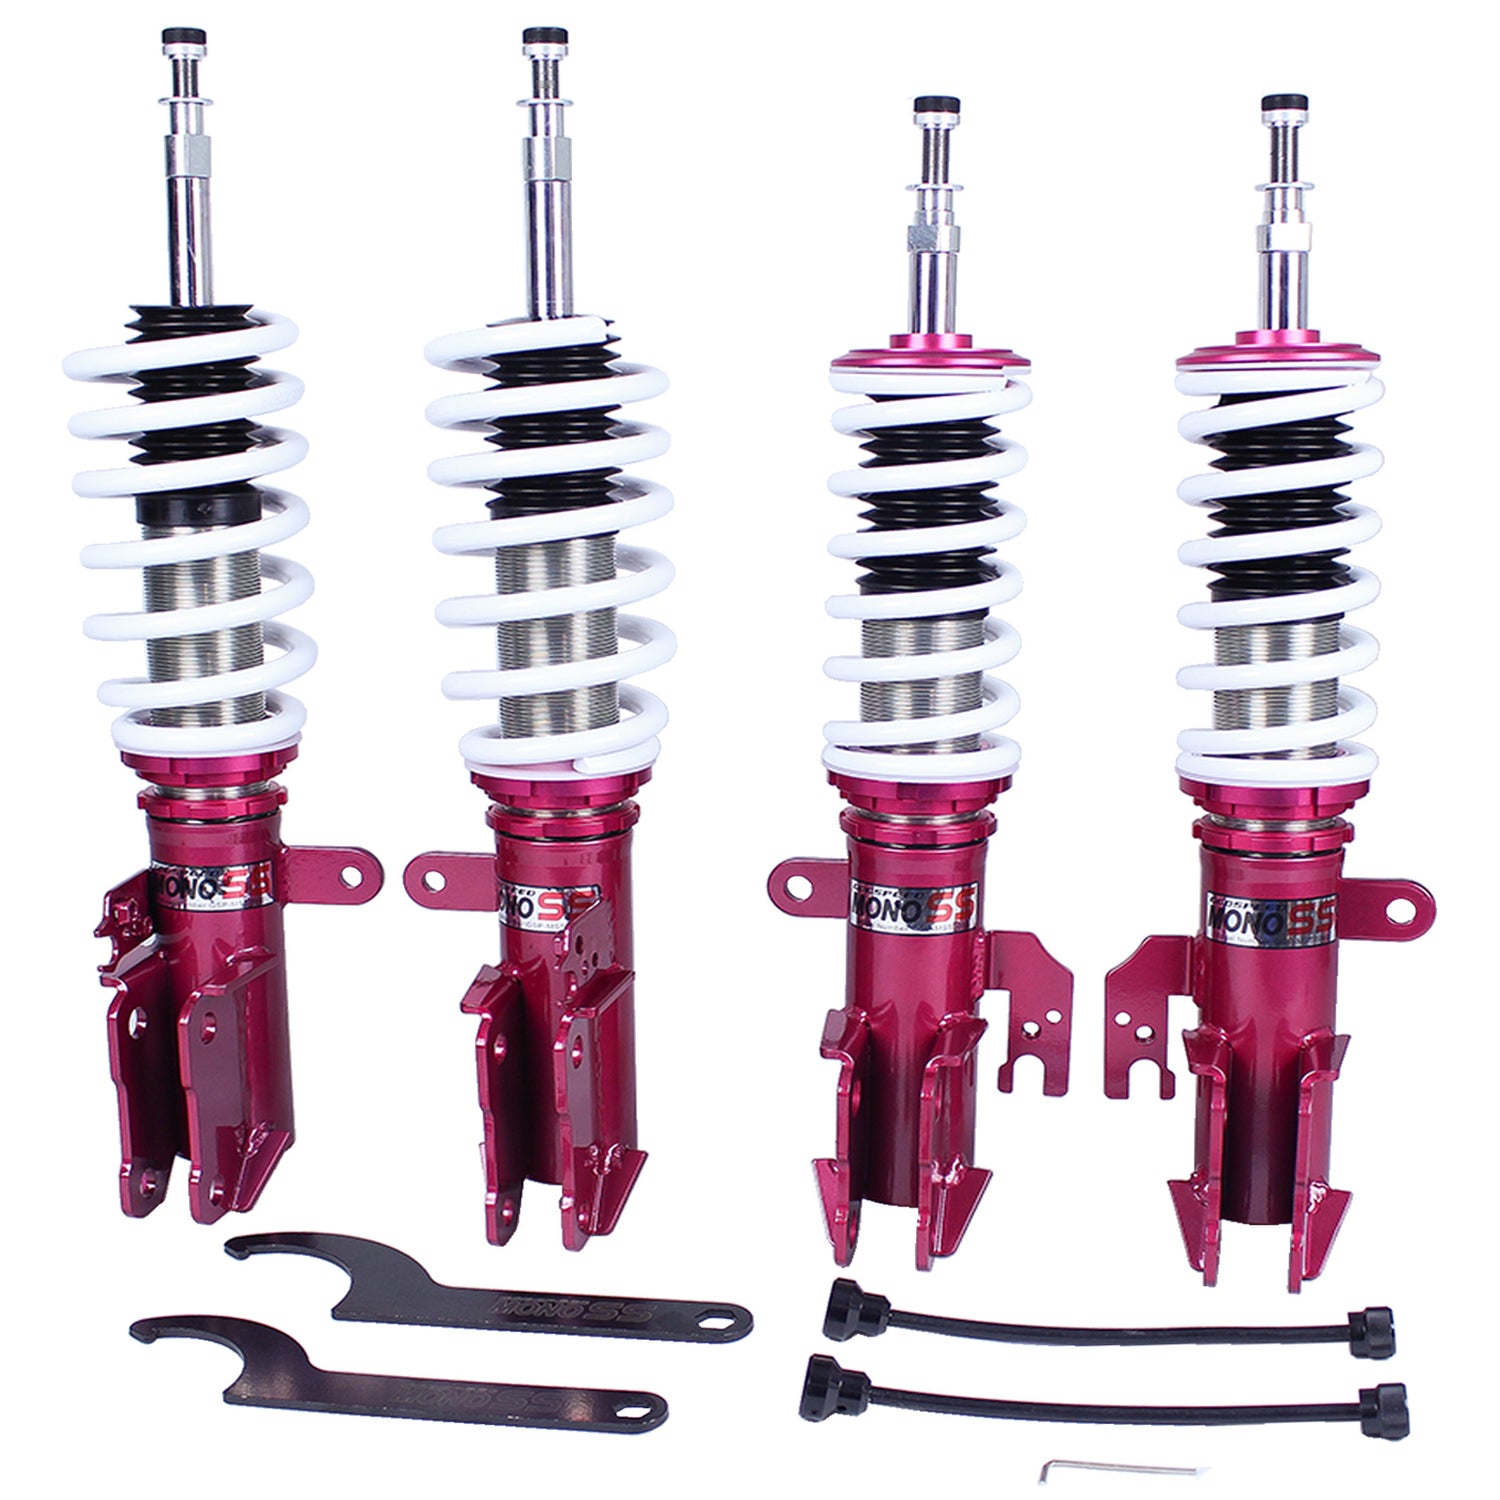 Godspeed MSS0650-B MonoSS Coilover Lowering Kit, Fully Adjustable, Ride Height, Spring Tension And 16 Click Damping, Lexus ES300/ES350(XV30) 2002-06